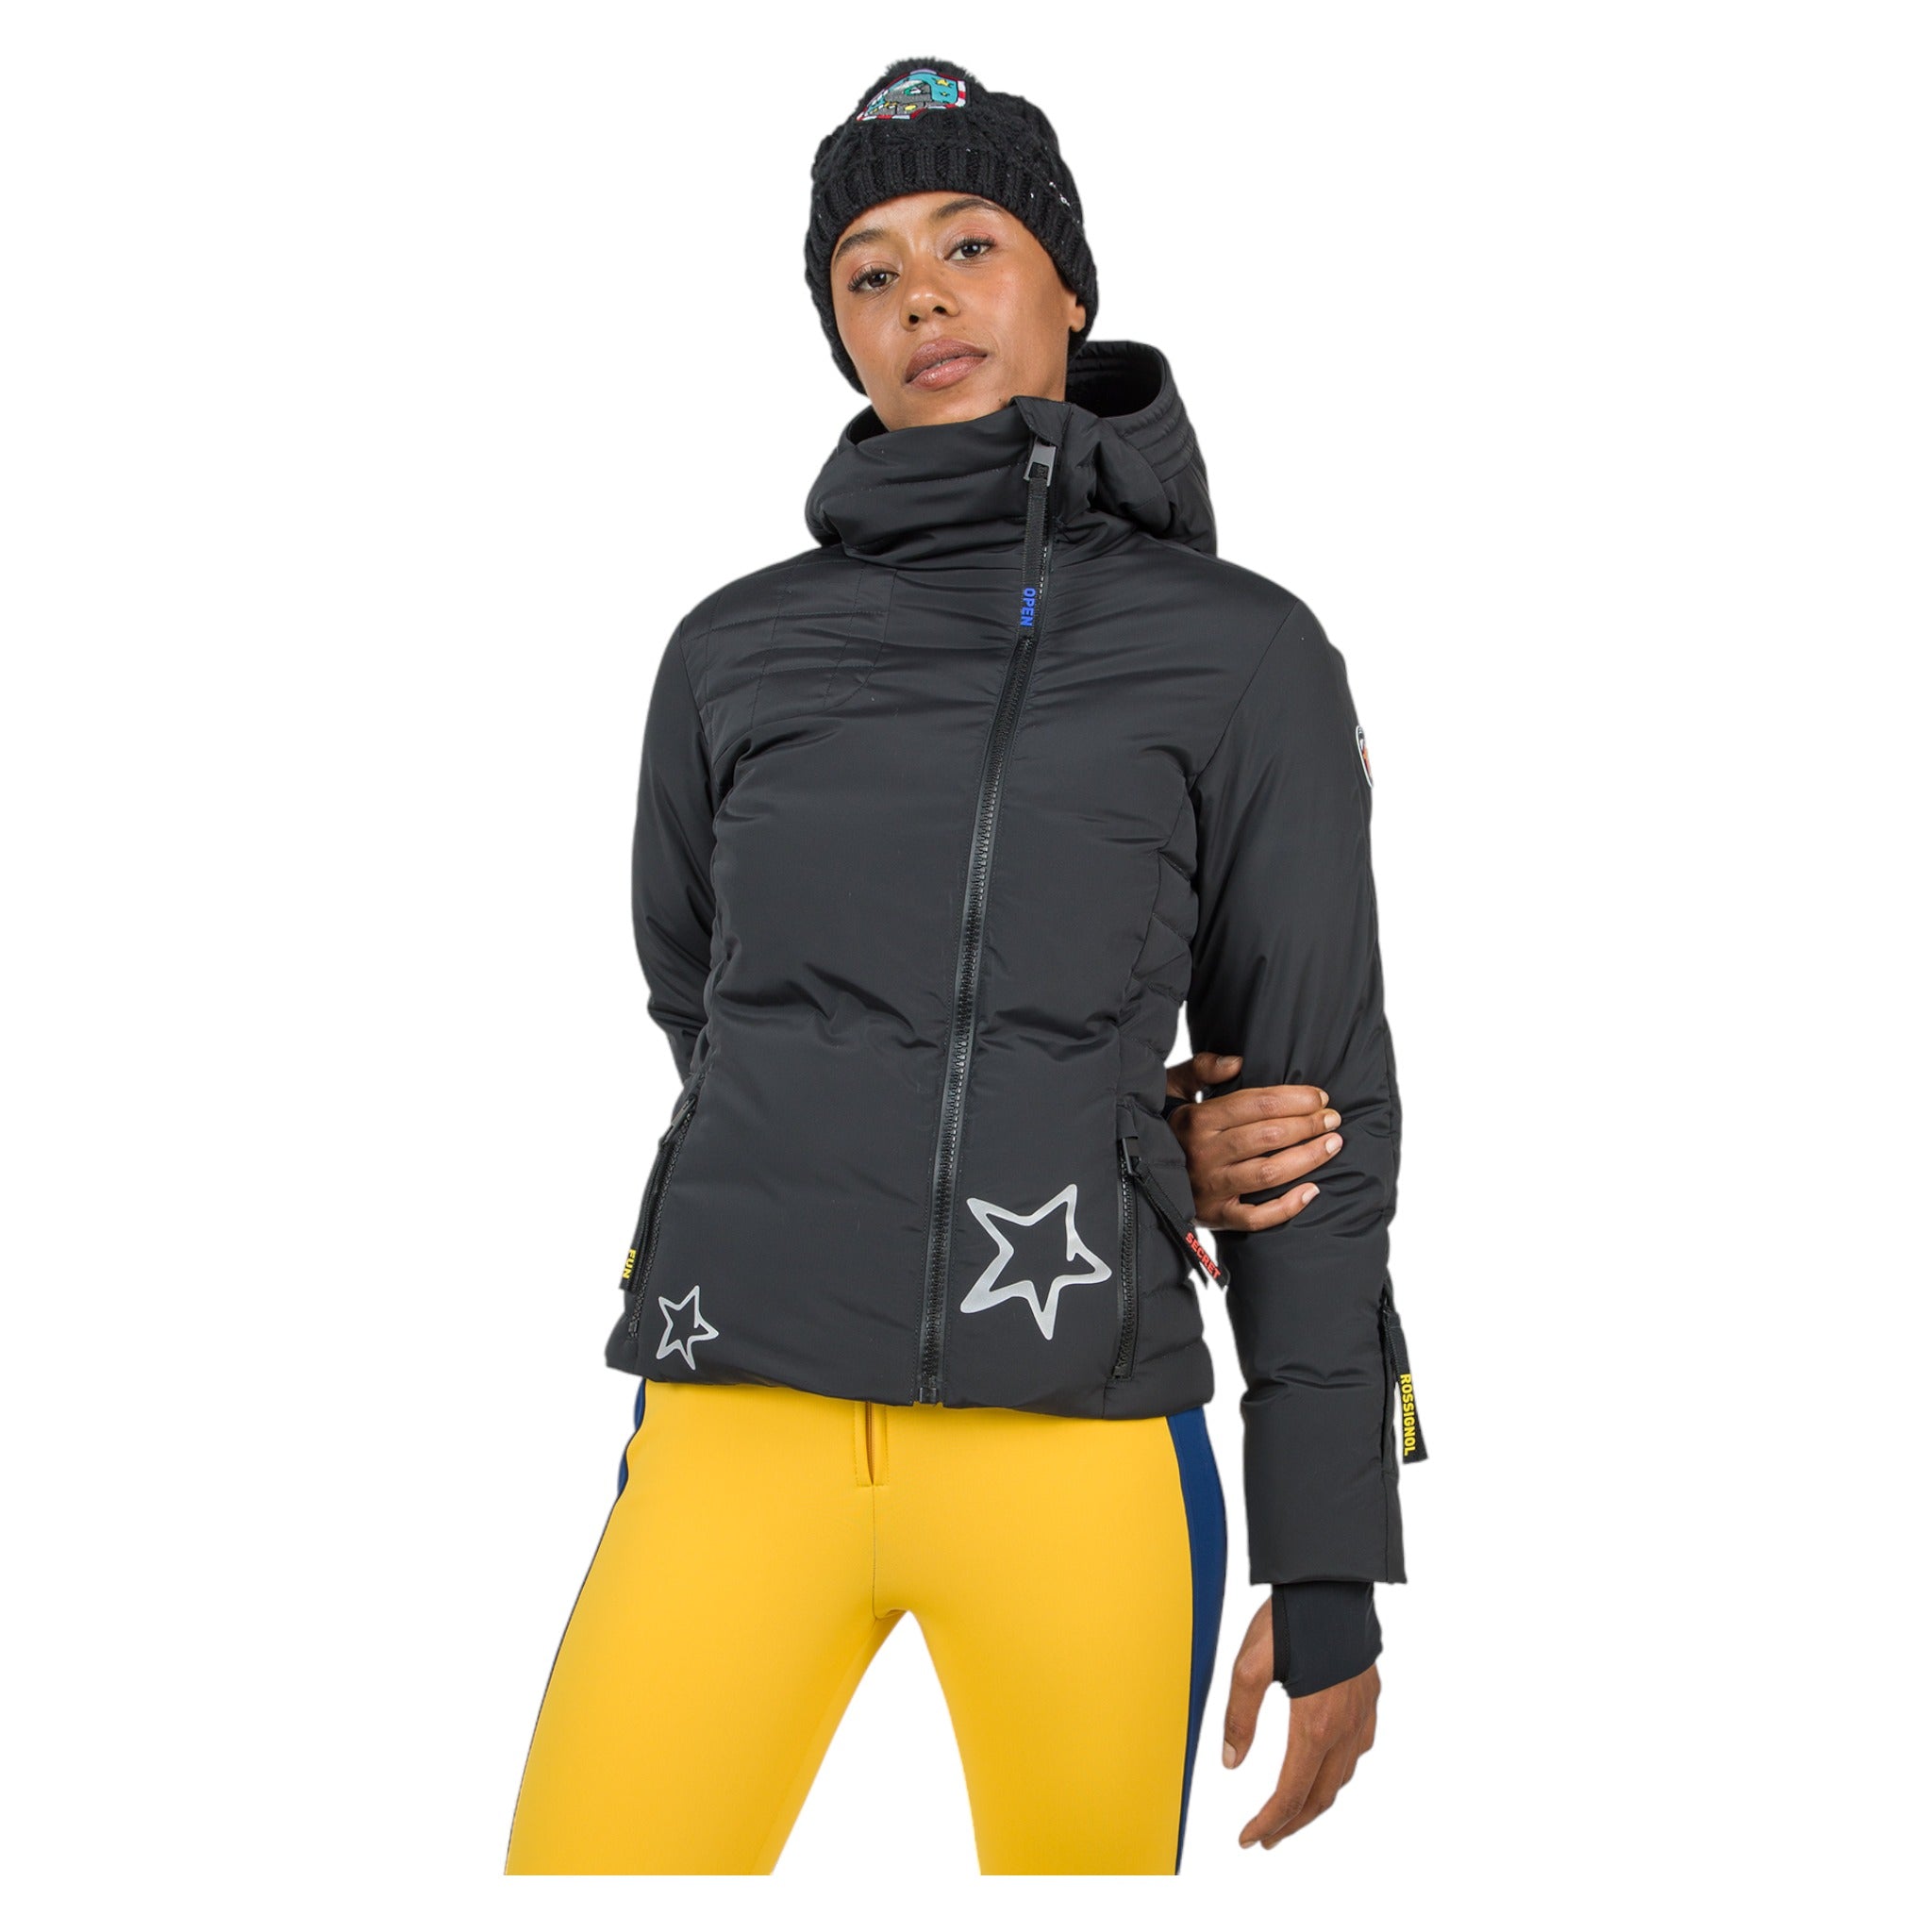 Ski and winter jackets for women – Oberson